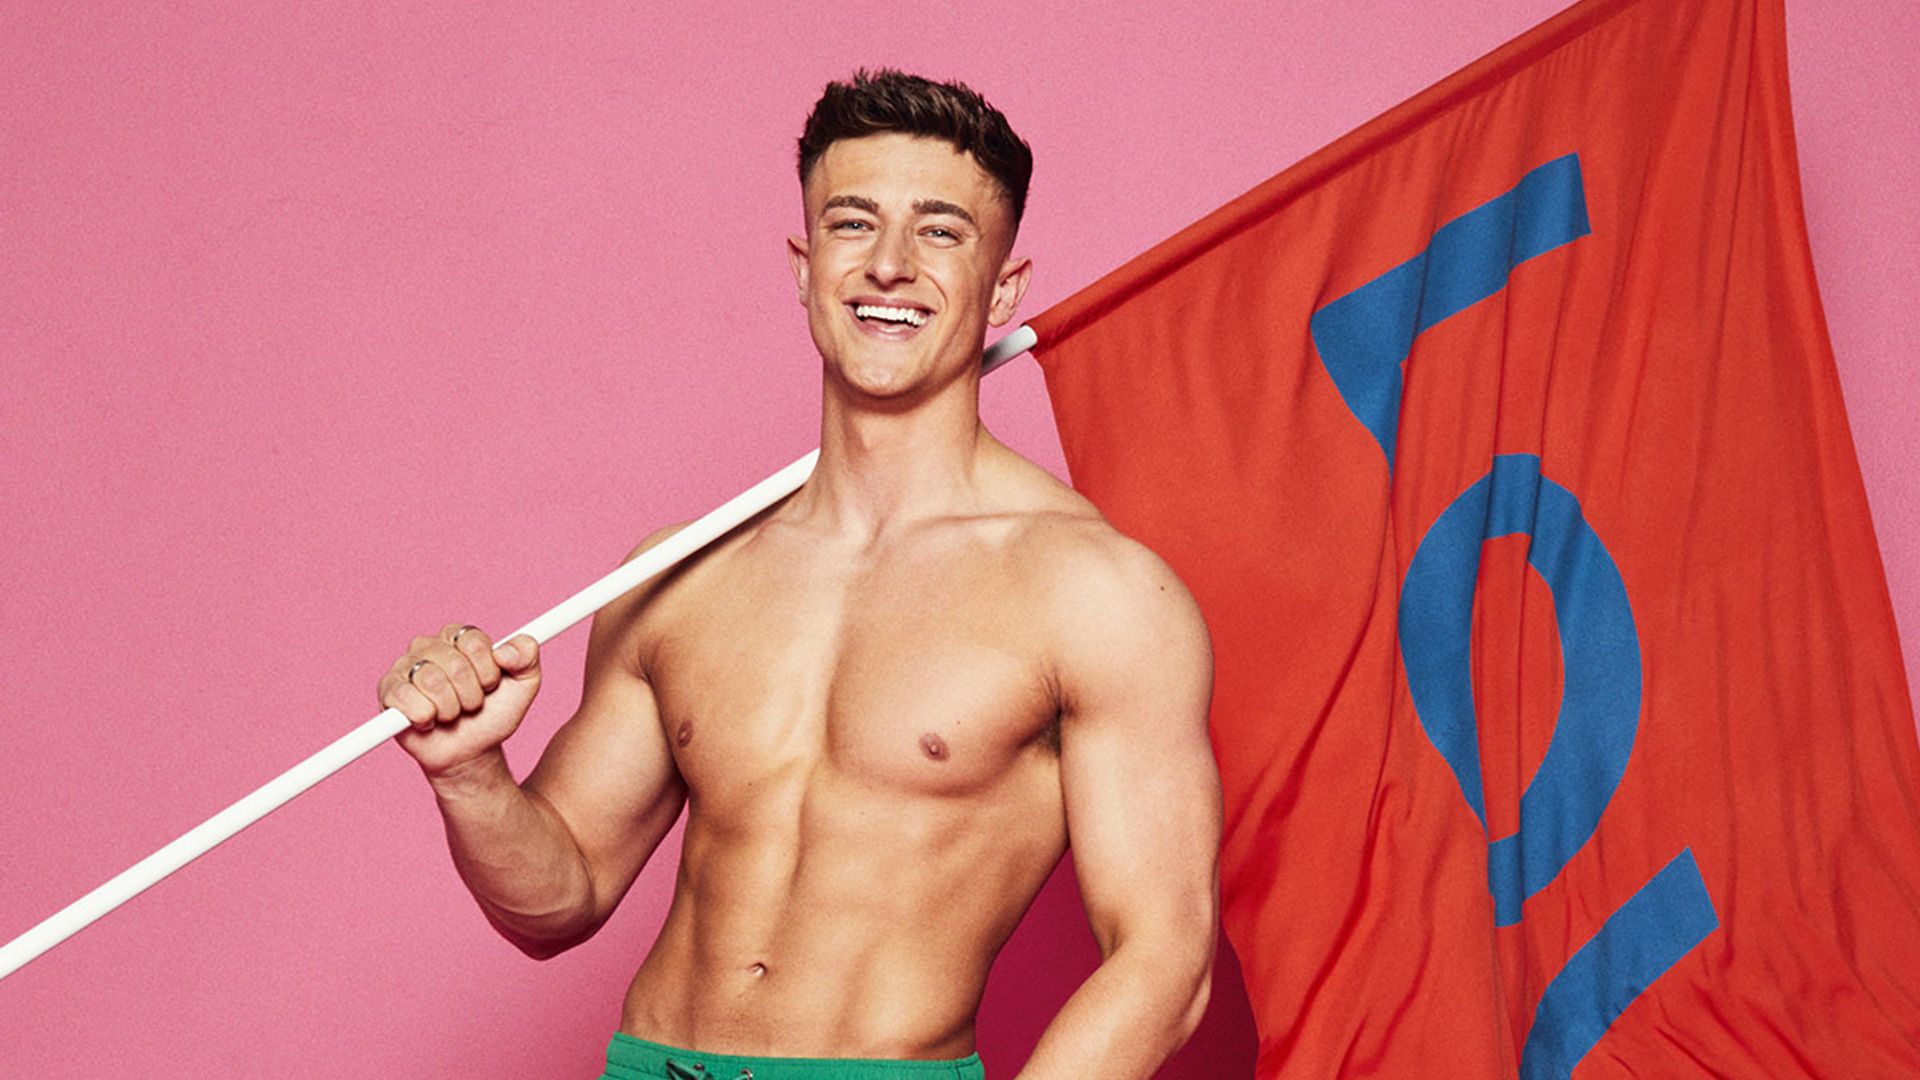 Love Island star Liam Llewellyn quits show after just five days - details